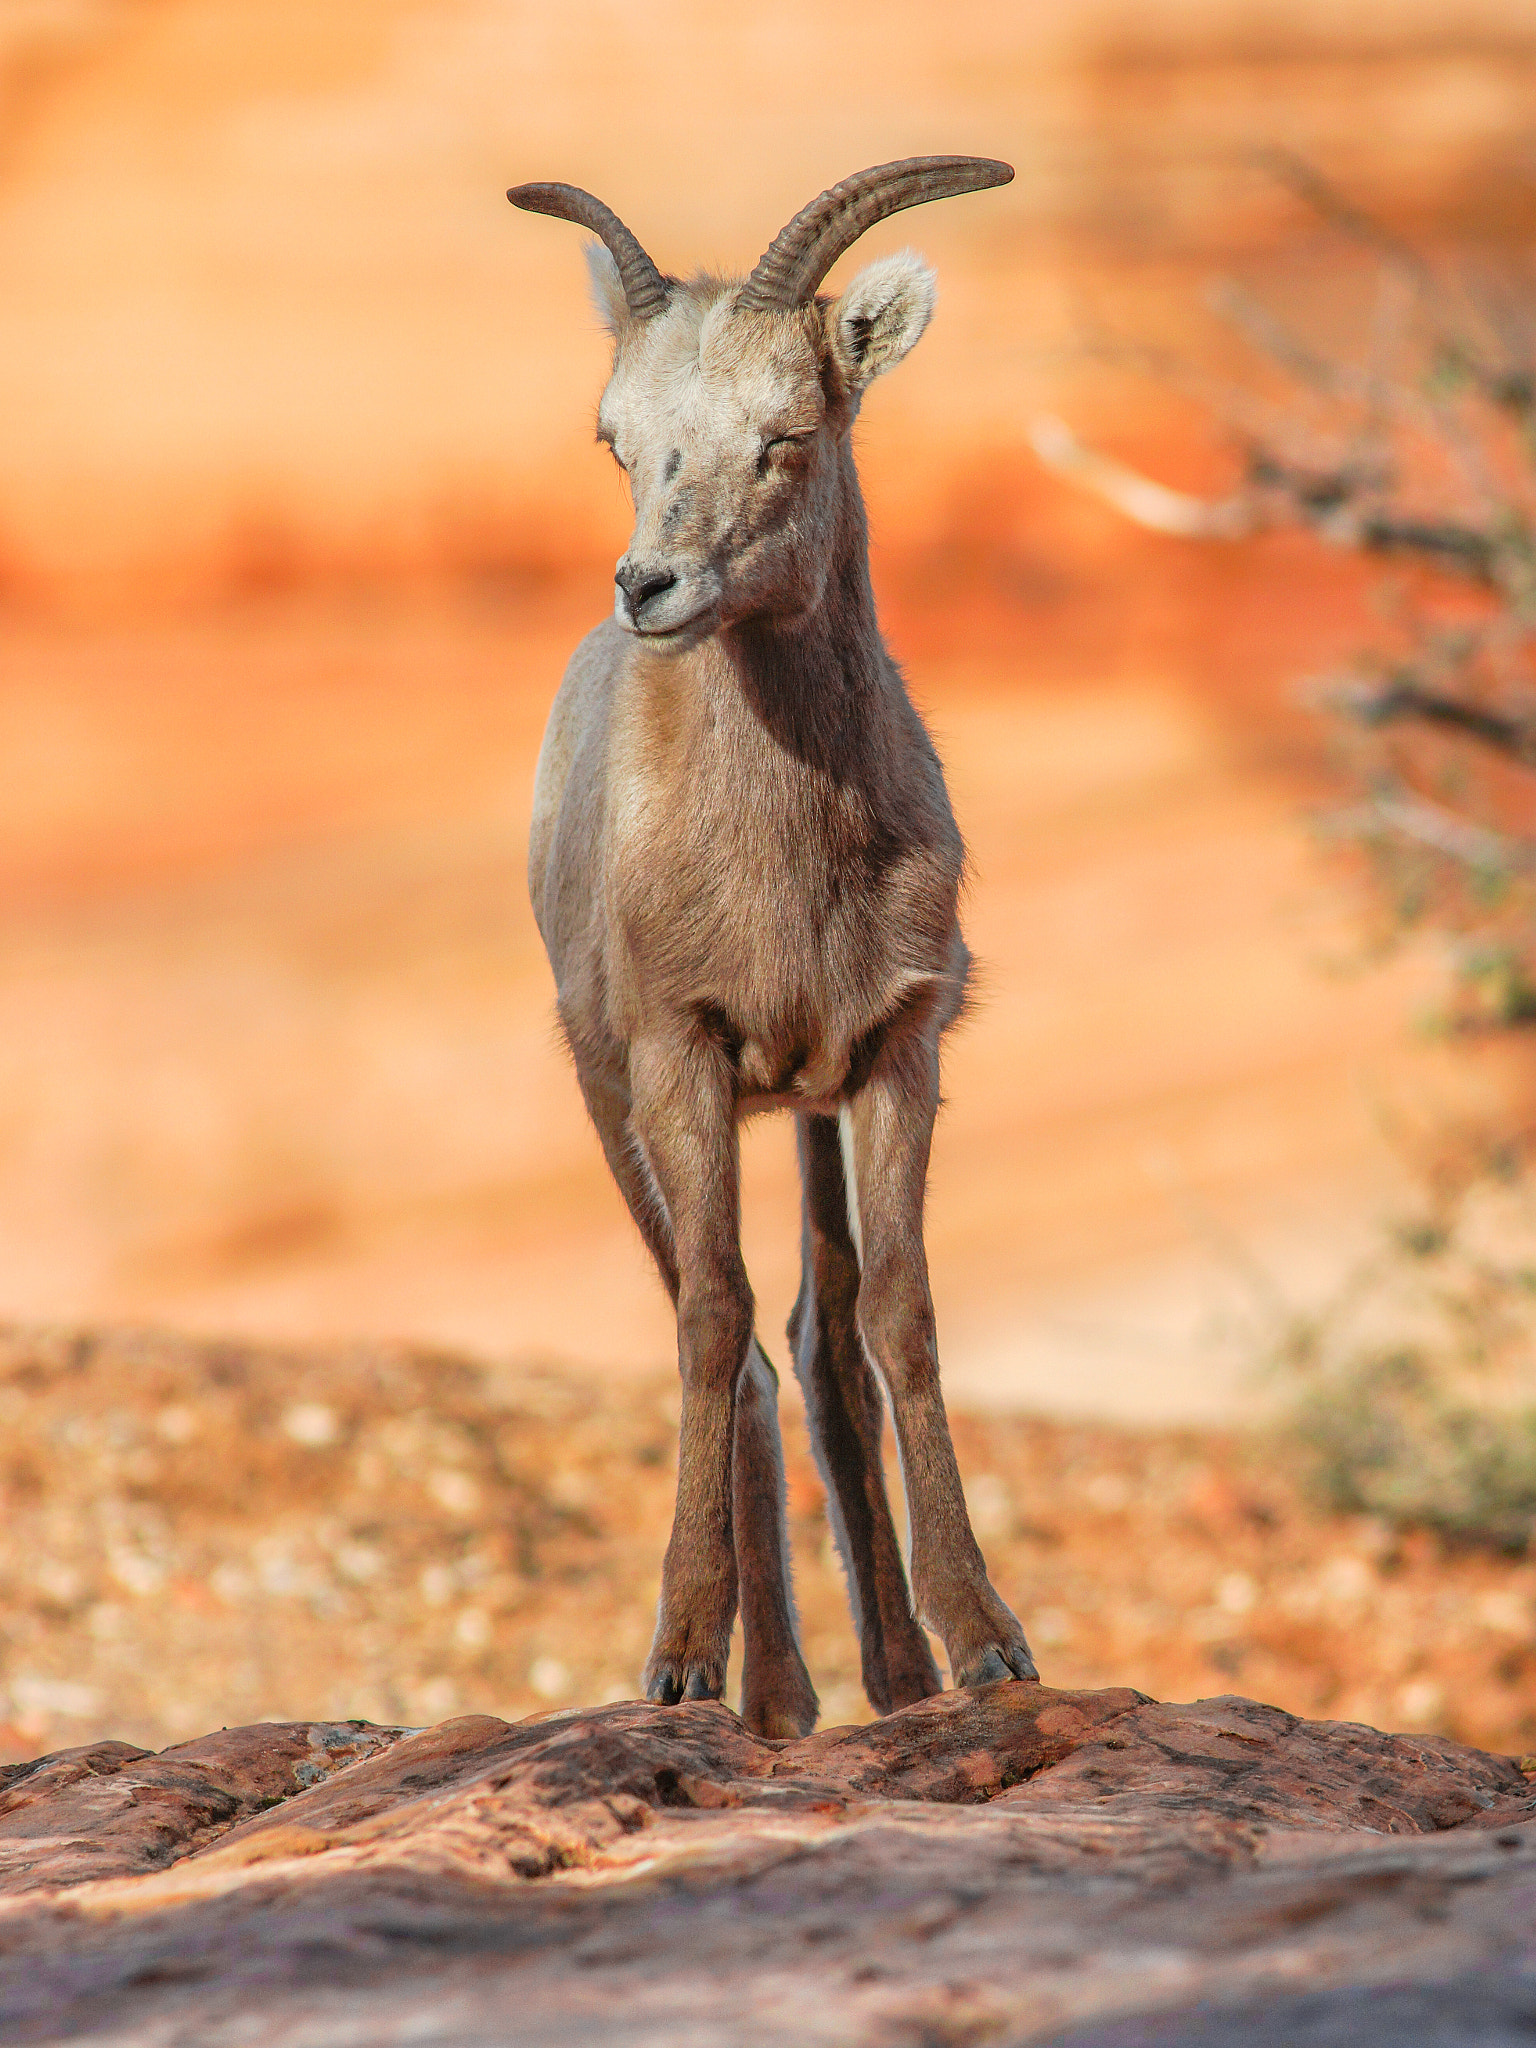 Sony SLT-A77 sample photo. Lanky yearling- zion ntl park desert bighorn photography